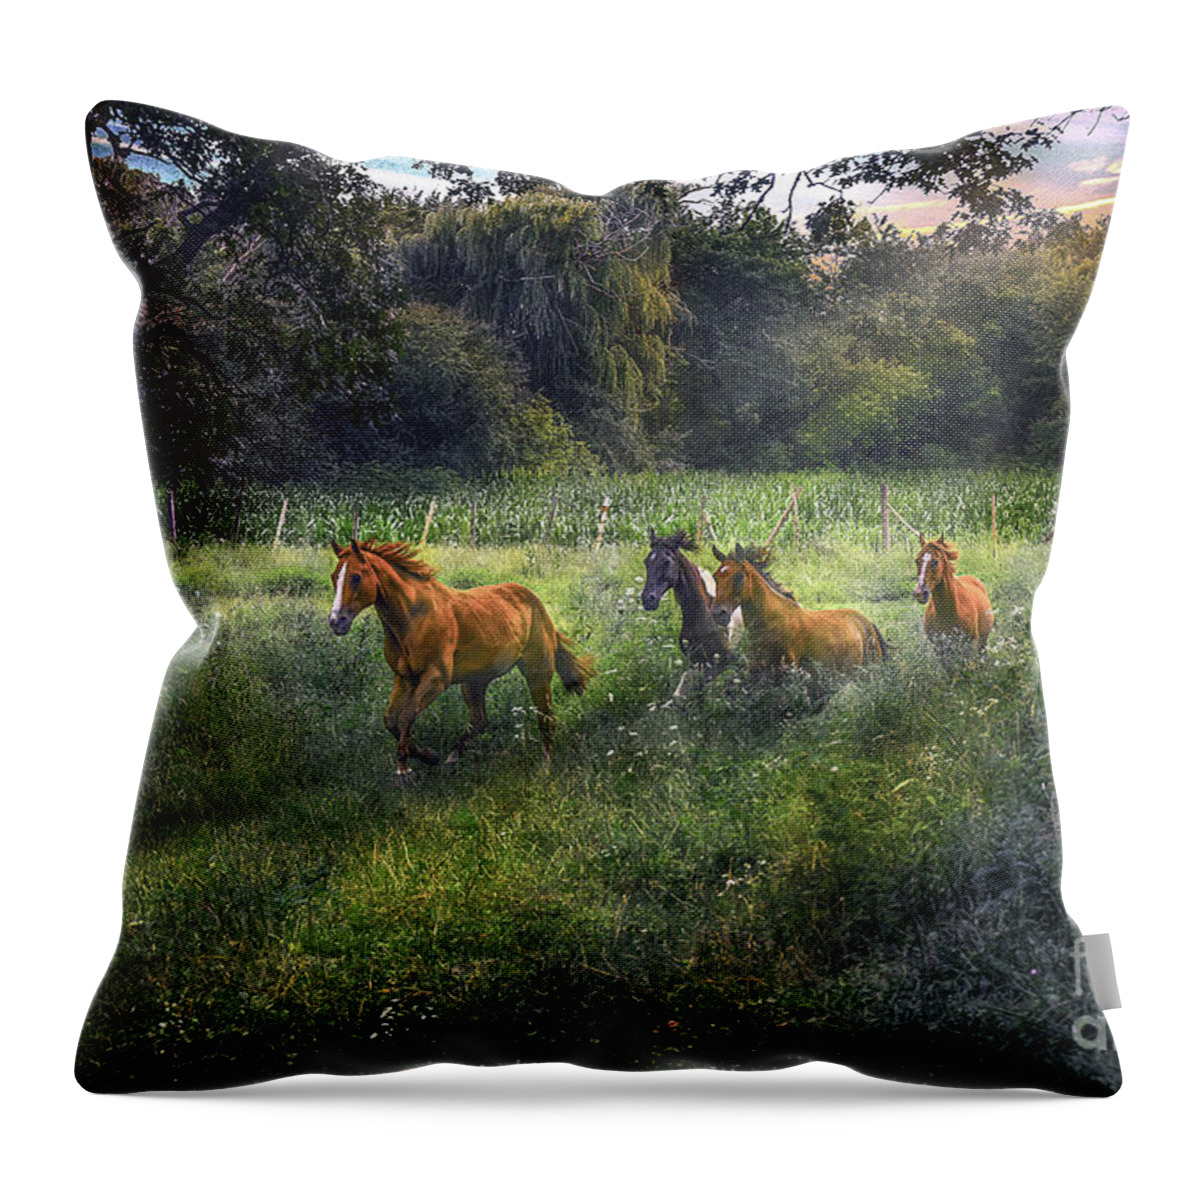 Horse Throw Pillow featuring the photograph For Horses by Sandra Rust